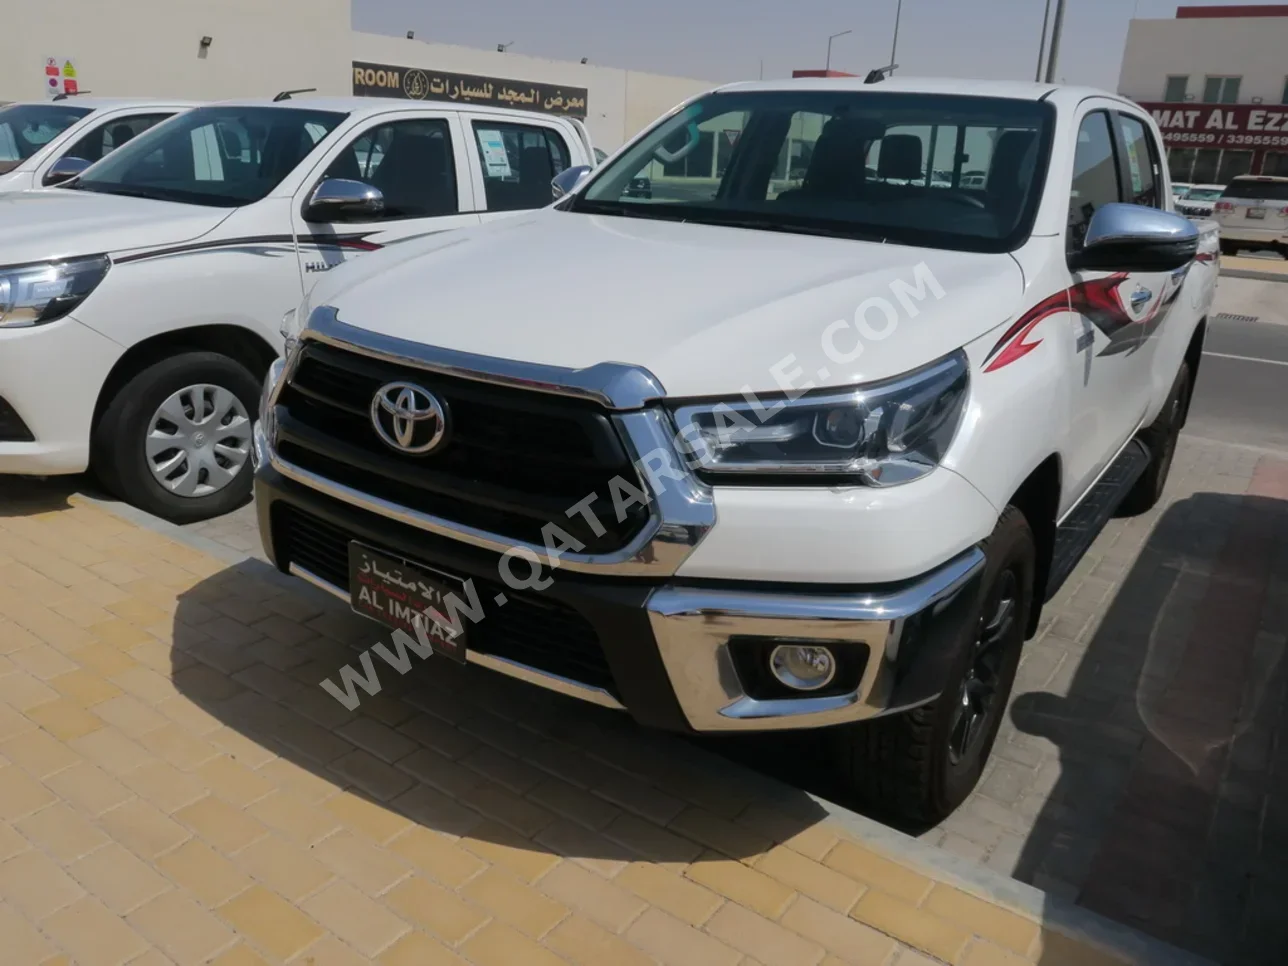 Toyota  Hilux  2023  Automatic  2,000 Km  4 Cylinder  Four Wheel Drive (4WD)  Pick Up  White  With Warranty